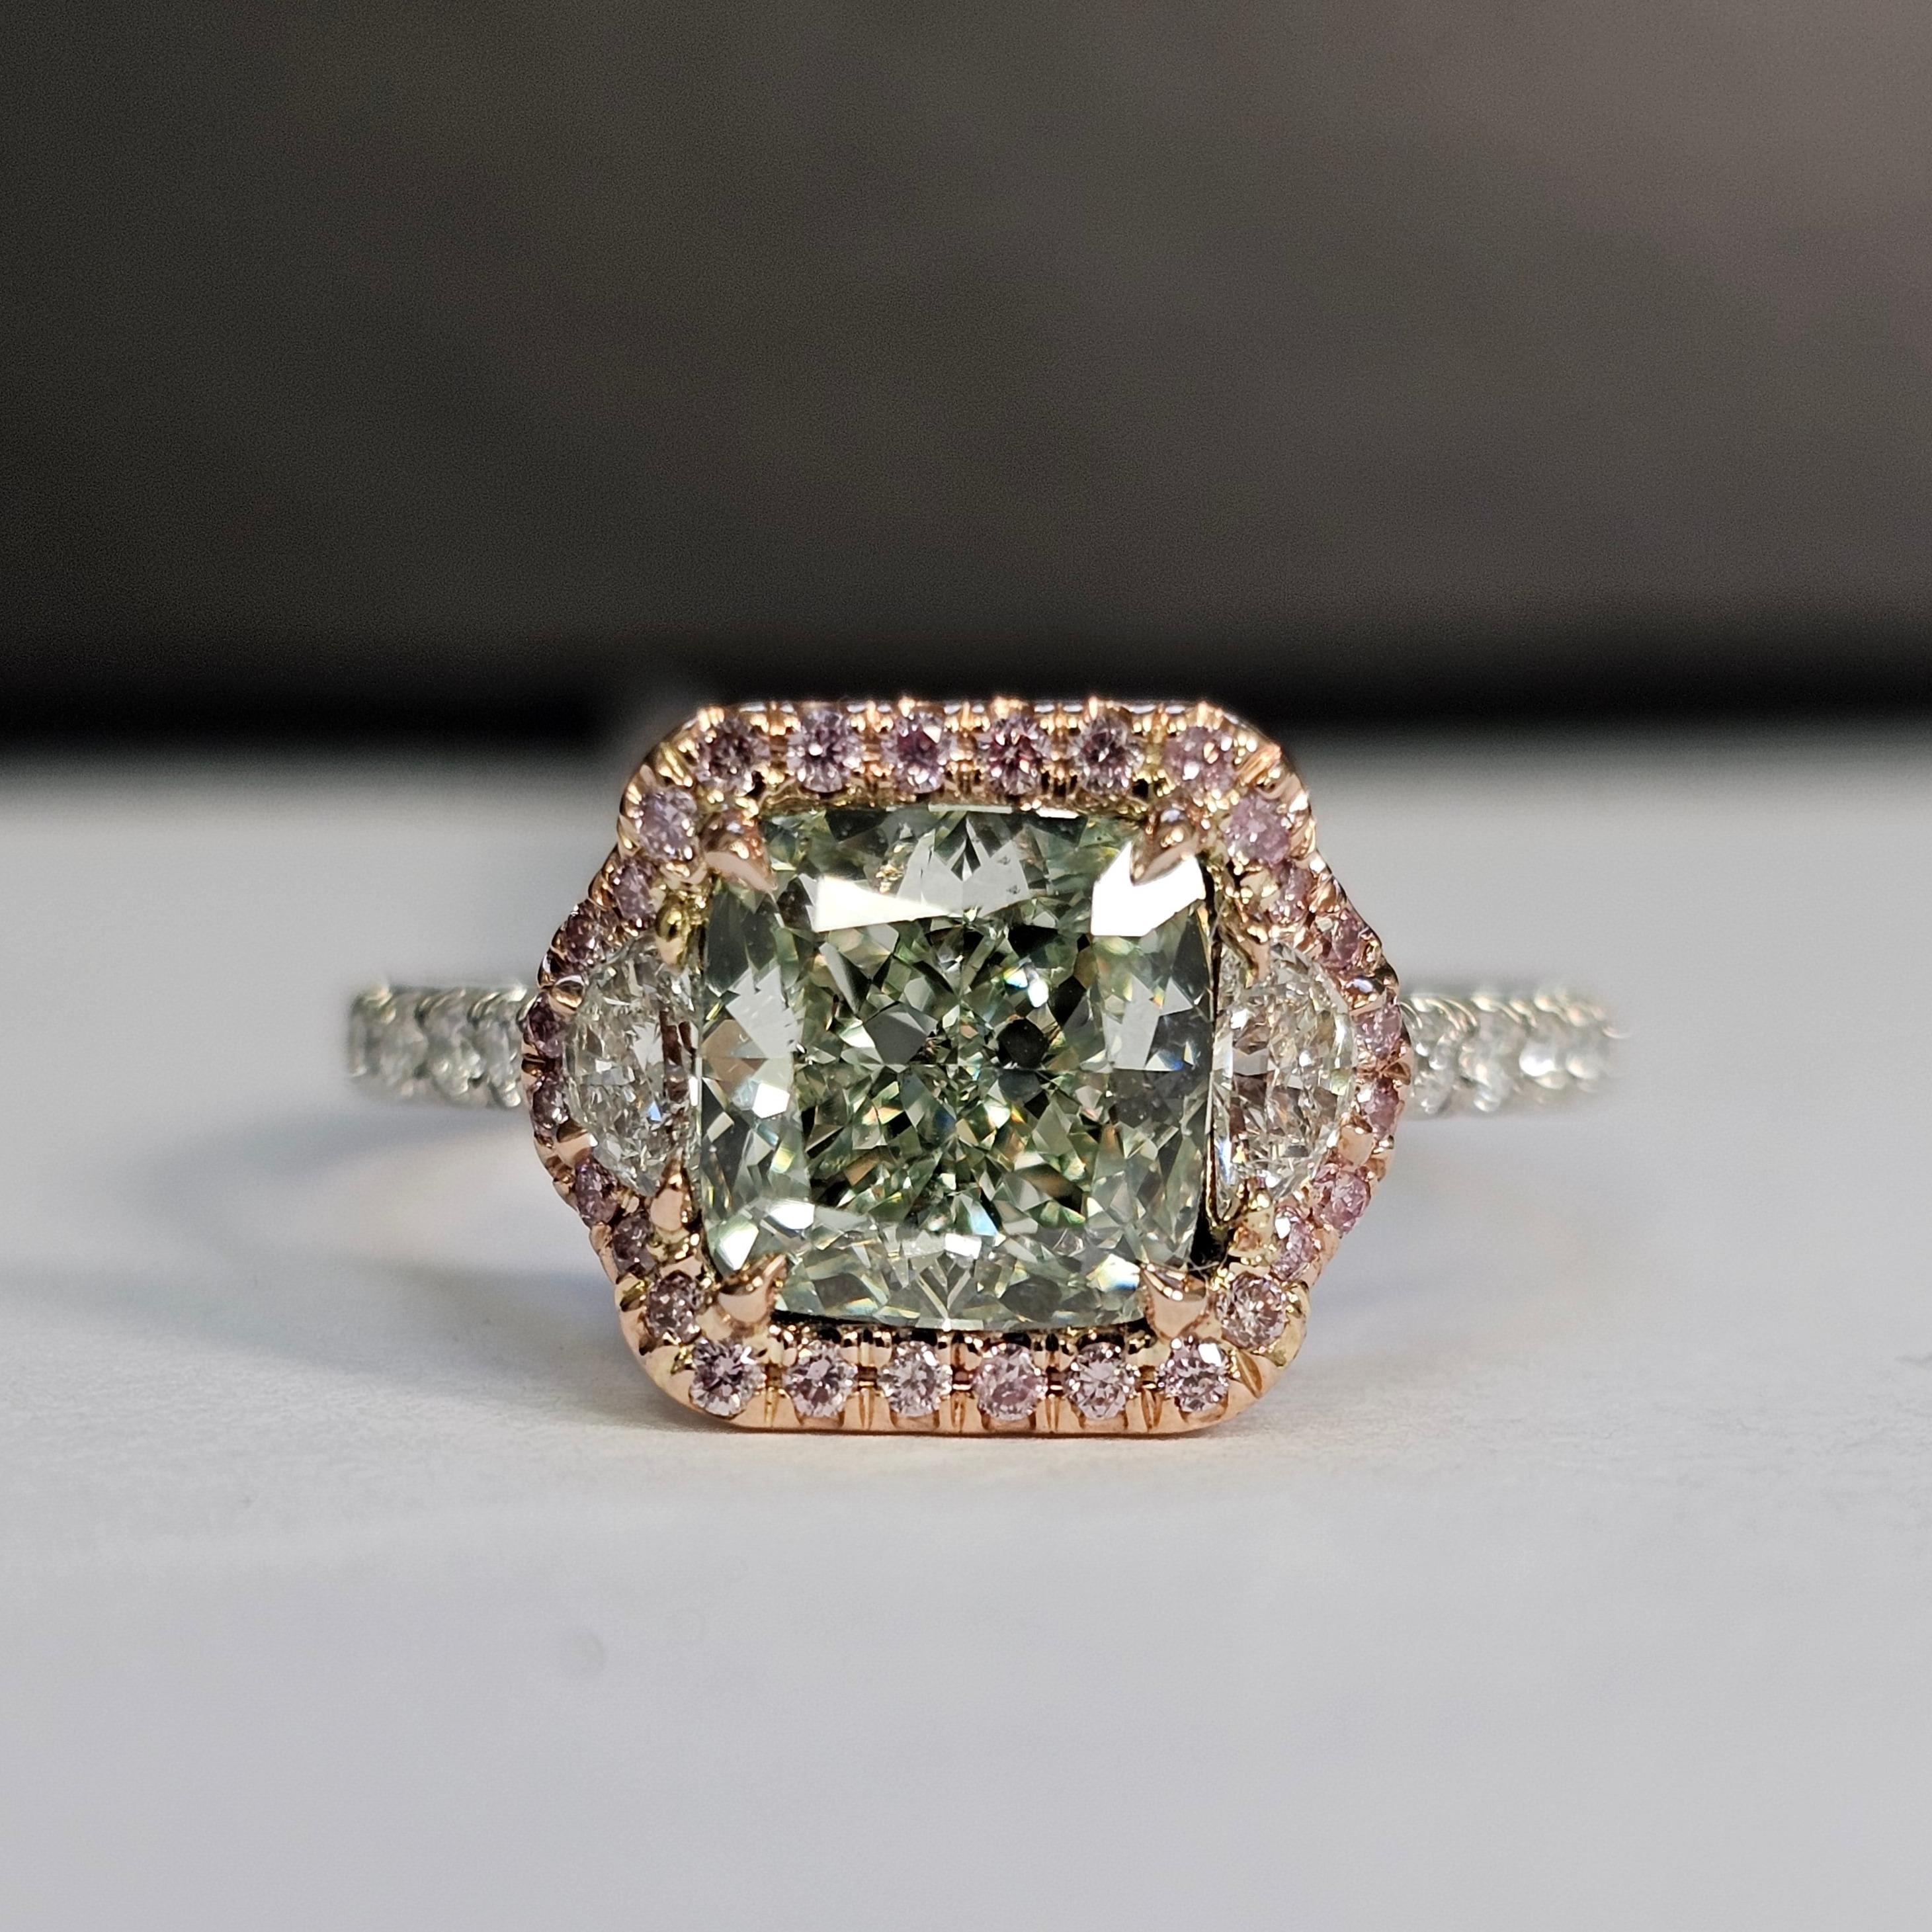 Gorgeous lime green colored diamond graded Fancy Yellowish Green, square cushion
Set in a Platinum and Rose Gold Ring with Fancy Intense Pink diamonds surrounding the center stone along with colorless half moons, breathtaking ring
Green diamonds